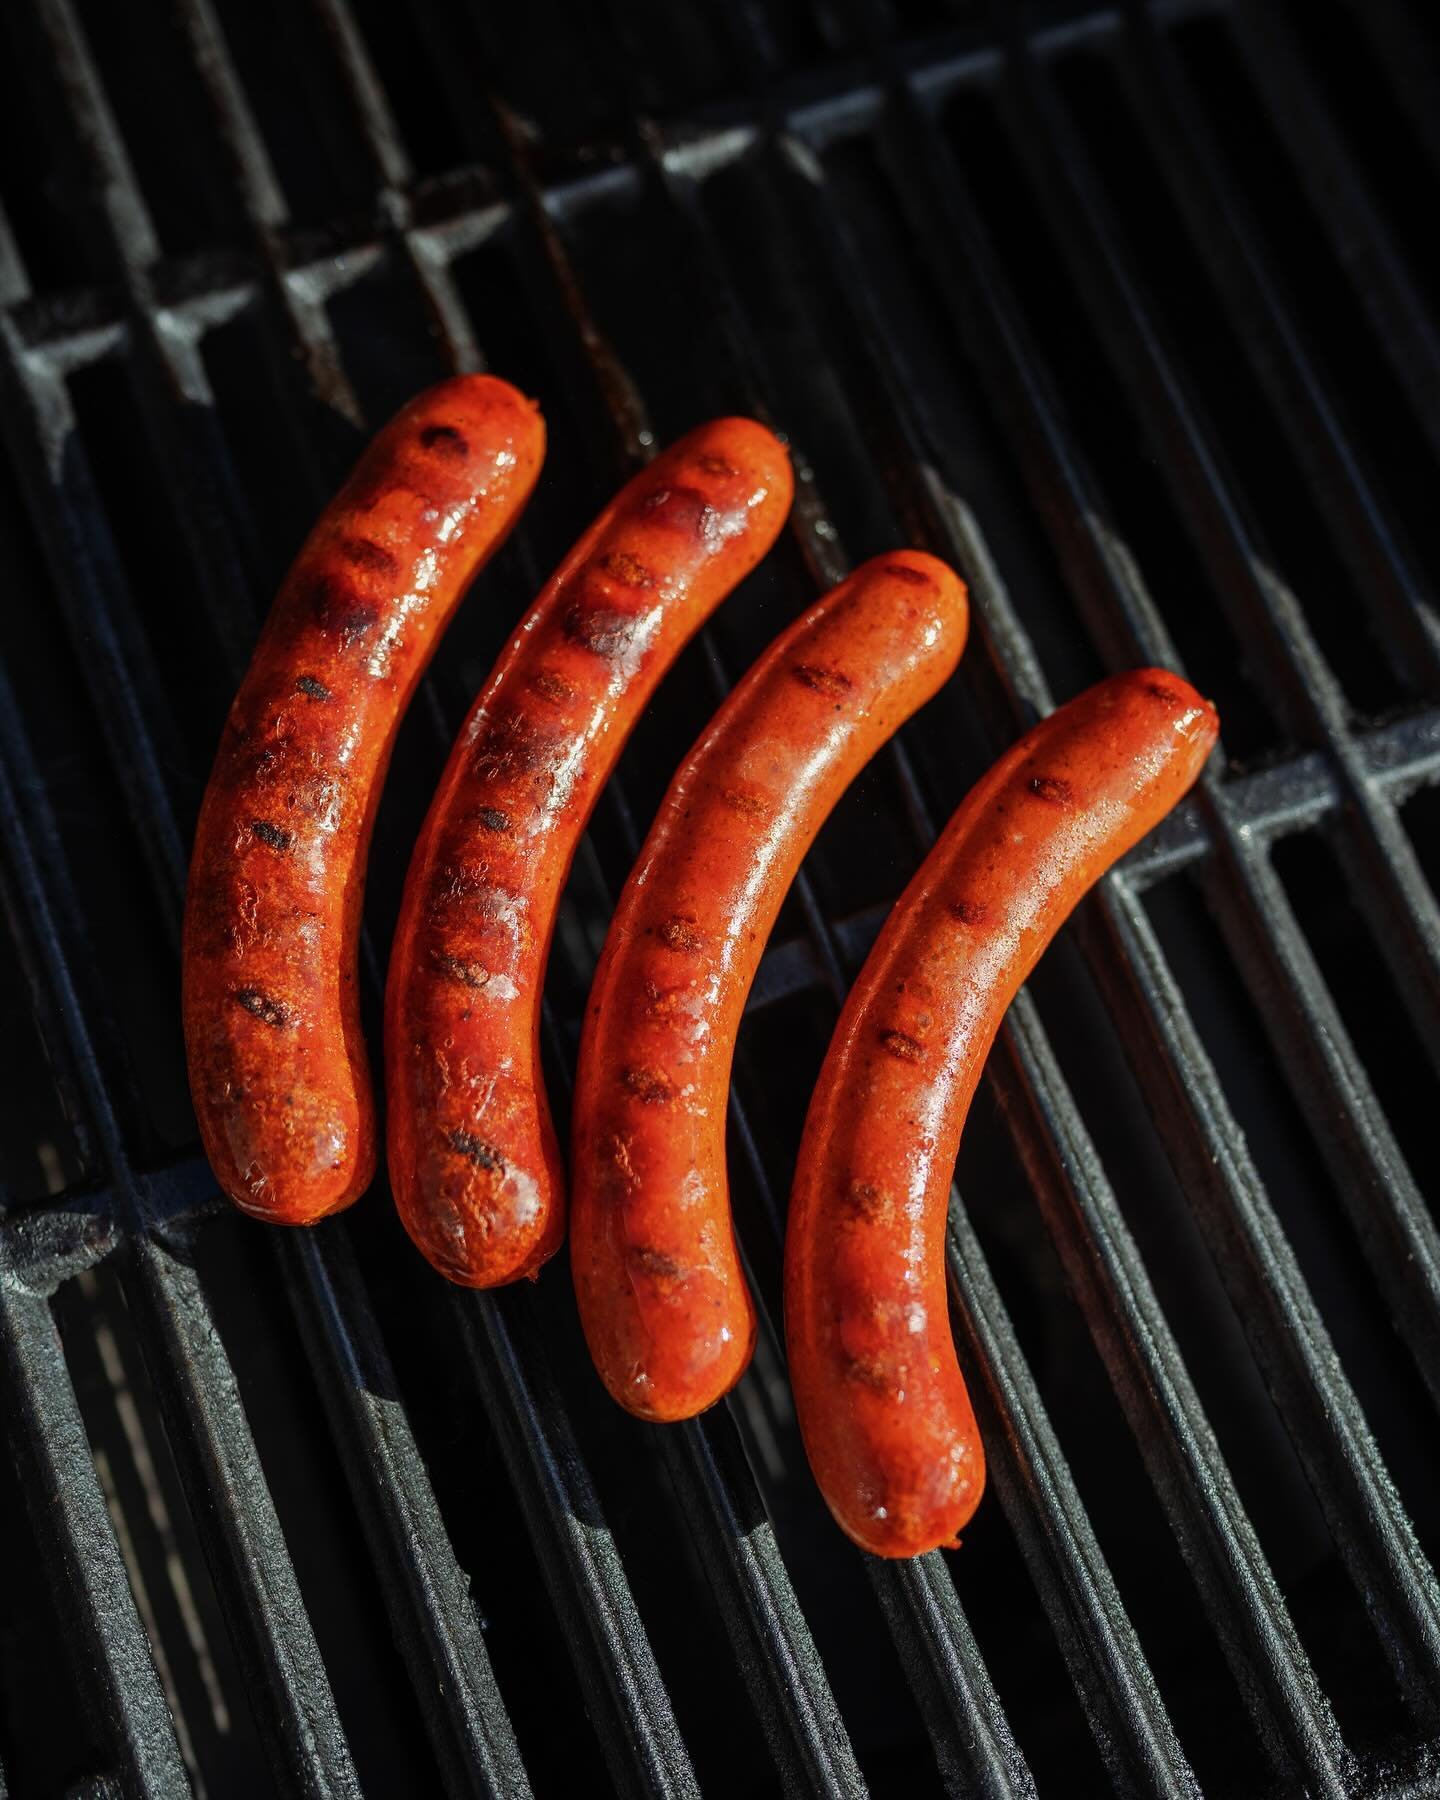 What are you doing for Memorial Day? We&rsquo;ll have hotdogs, sausages, beef kofte and chicken spiedies for the grill, plus potato and pasta salad too.